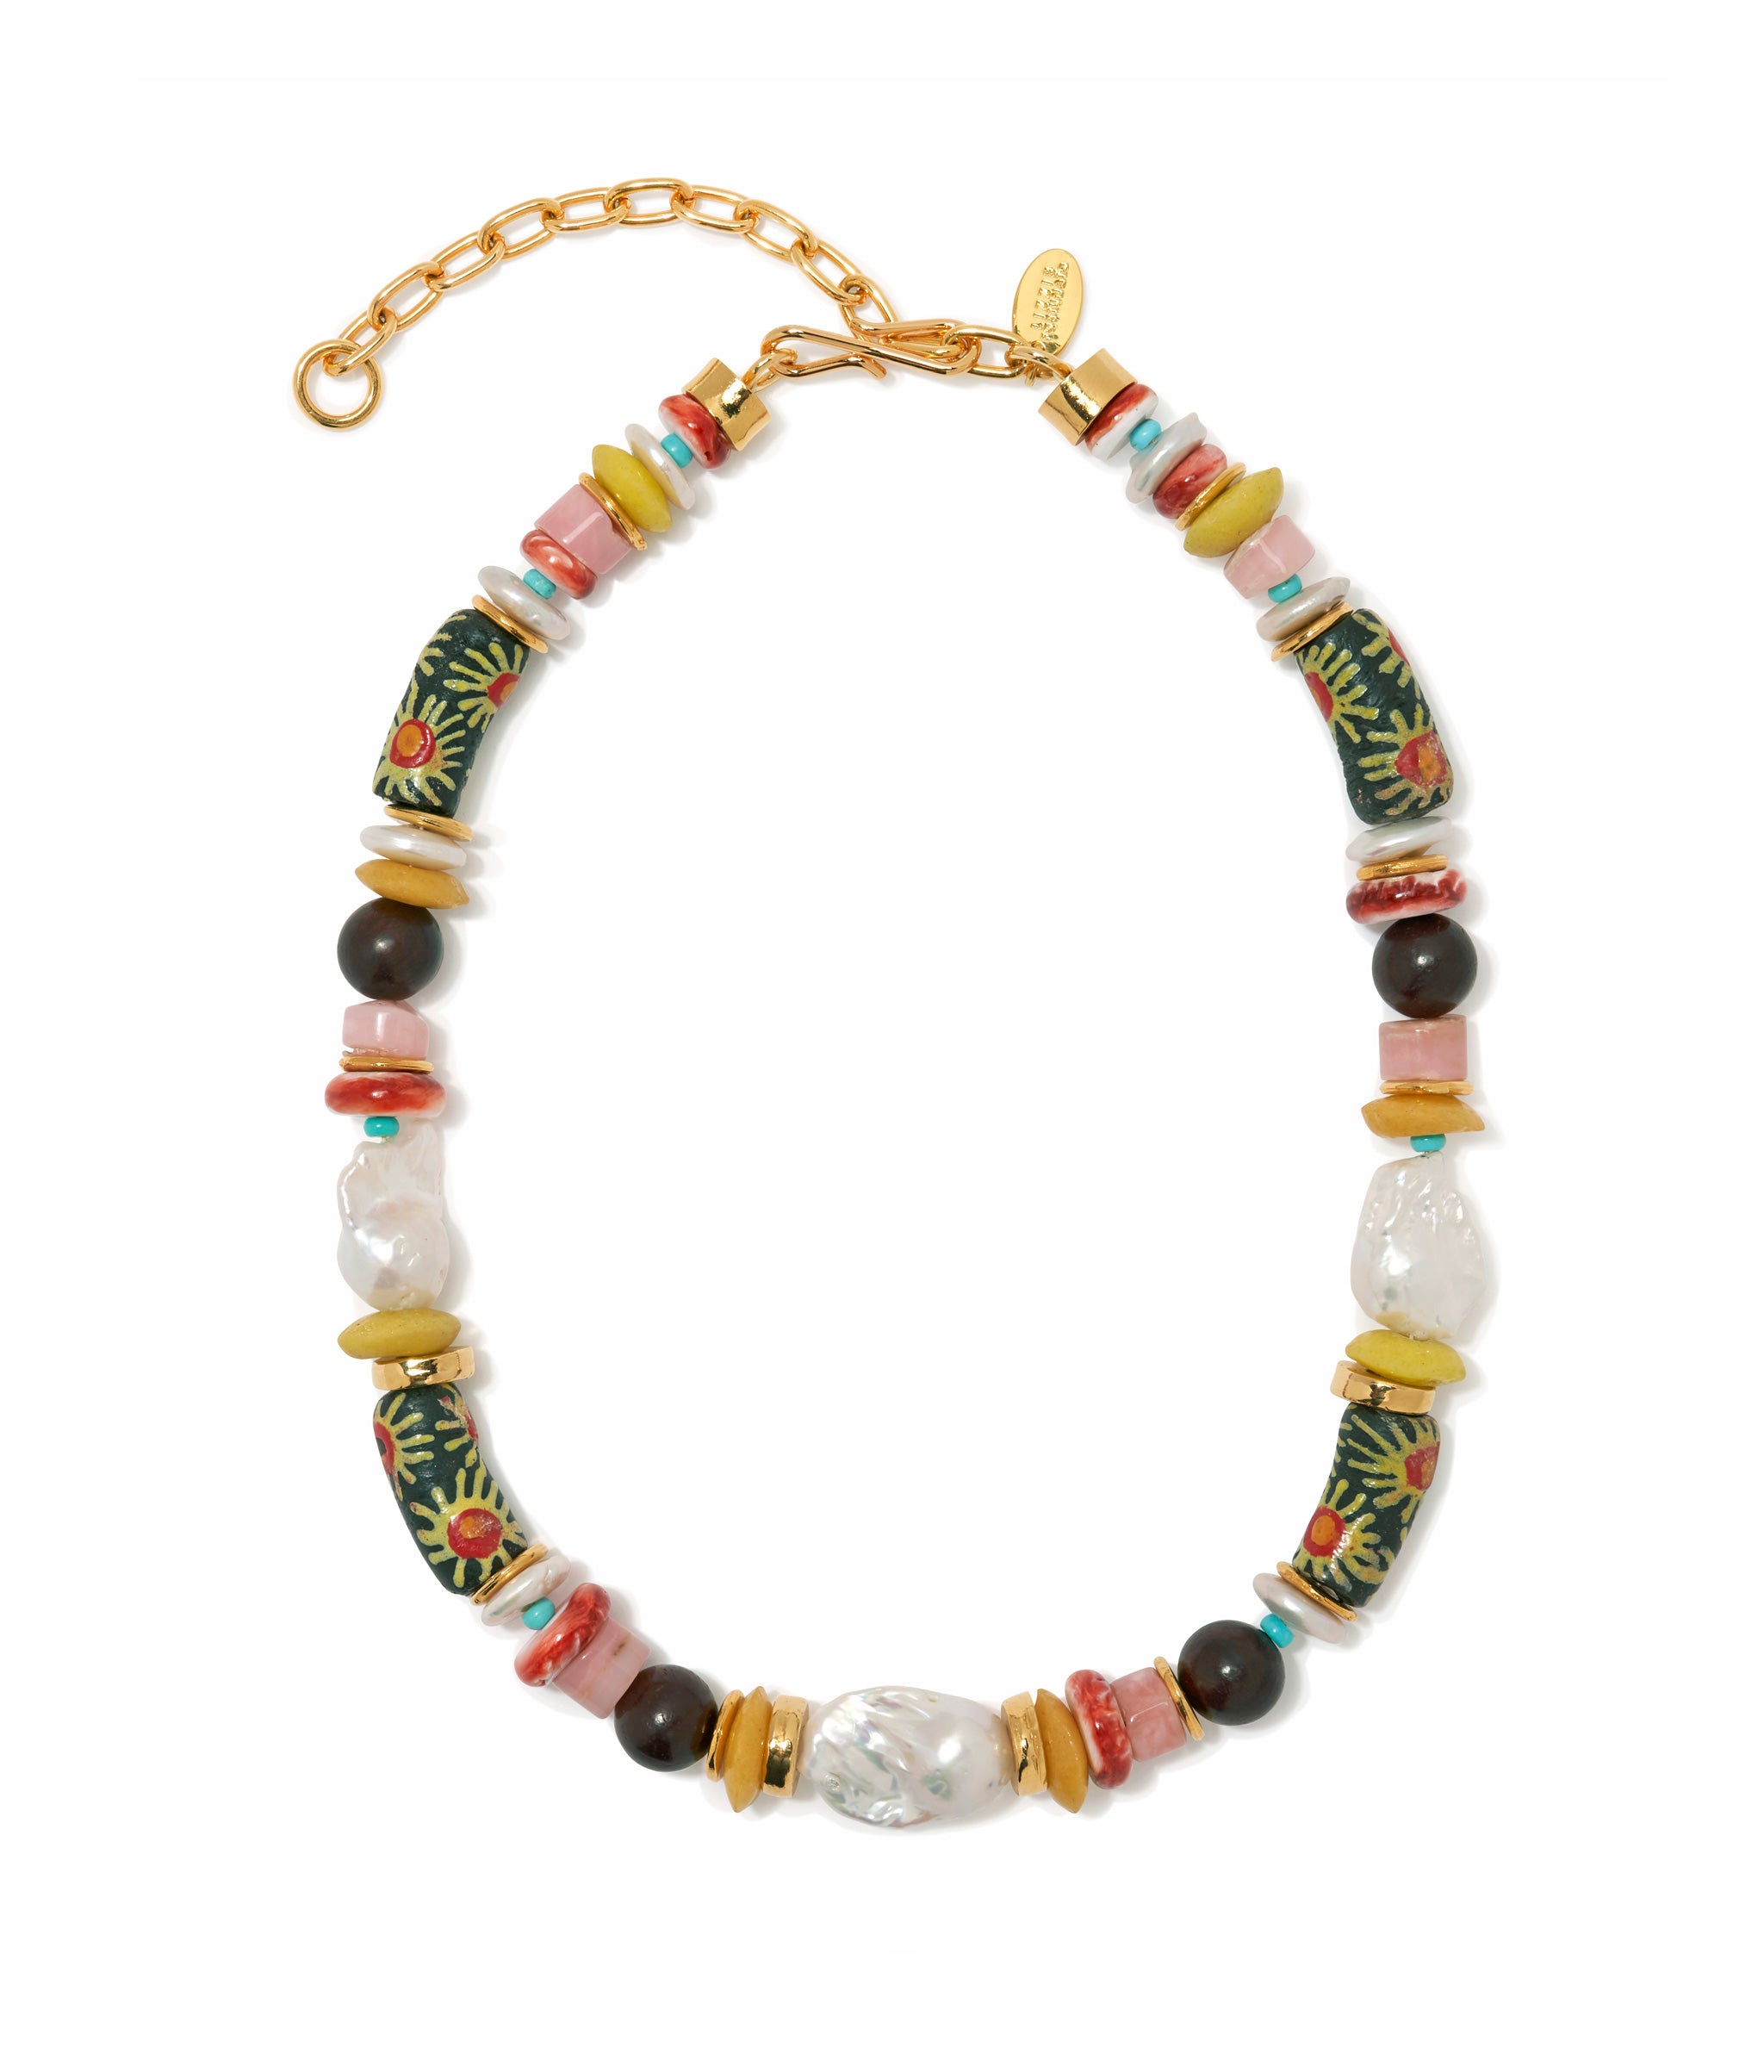 Souvenir Necklace in Tropic. Painted glass, spiny oyster, pink opal, turquoise, wood, gold beads, with freshwater pearls